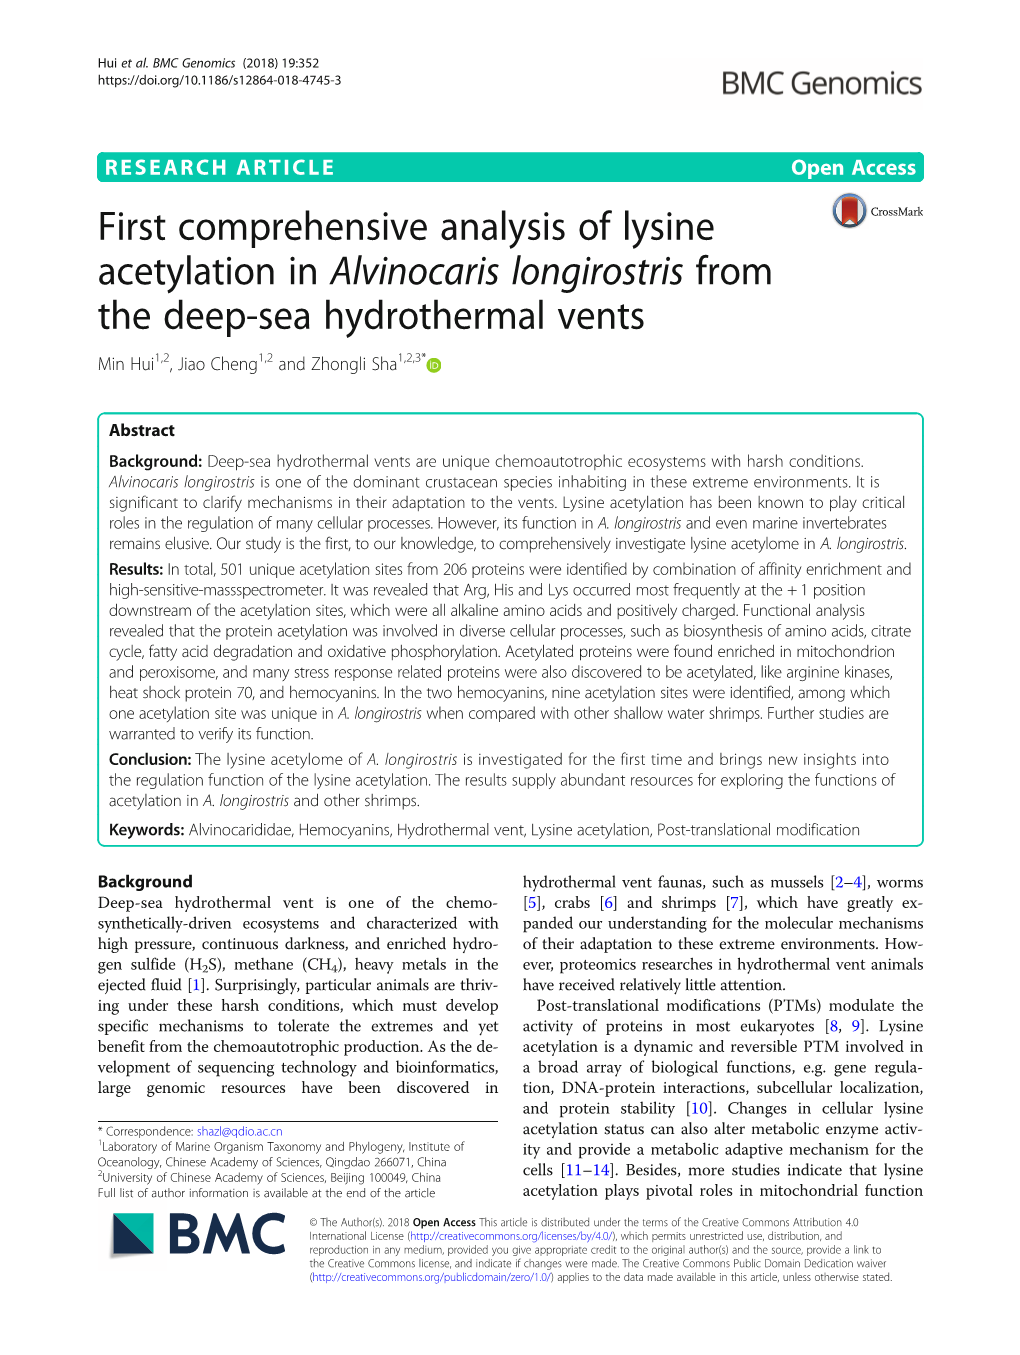 First Comprehensive Analysis of Lysine Acetylation in Alvinocaris Longirostris from the Deep-Sea Hydrothermal Vents Min Hui1,2, Jiao Cheng1,2 and Zhongli Sha1,2,3*